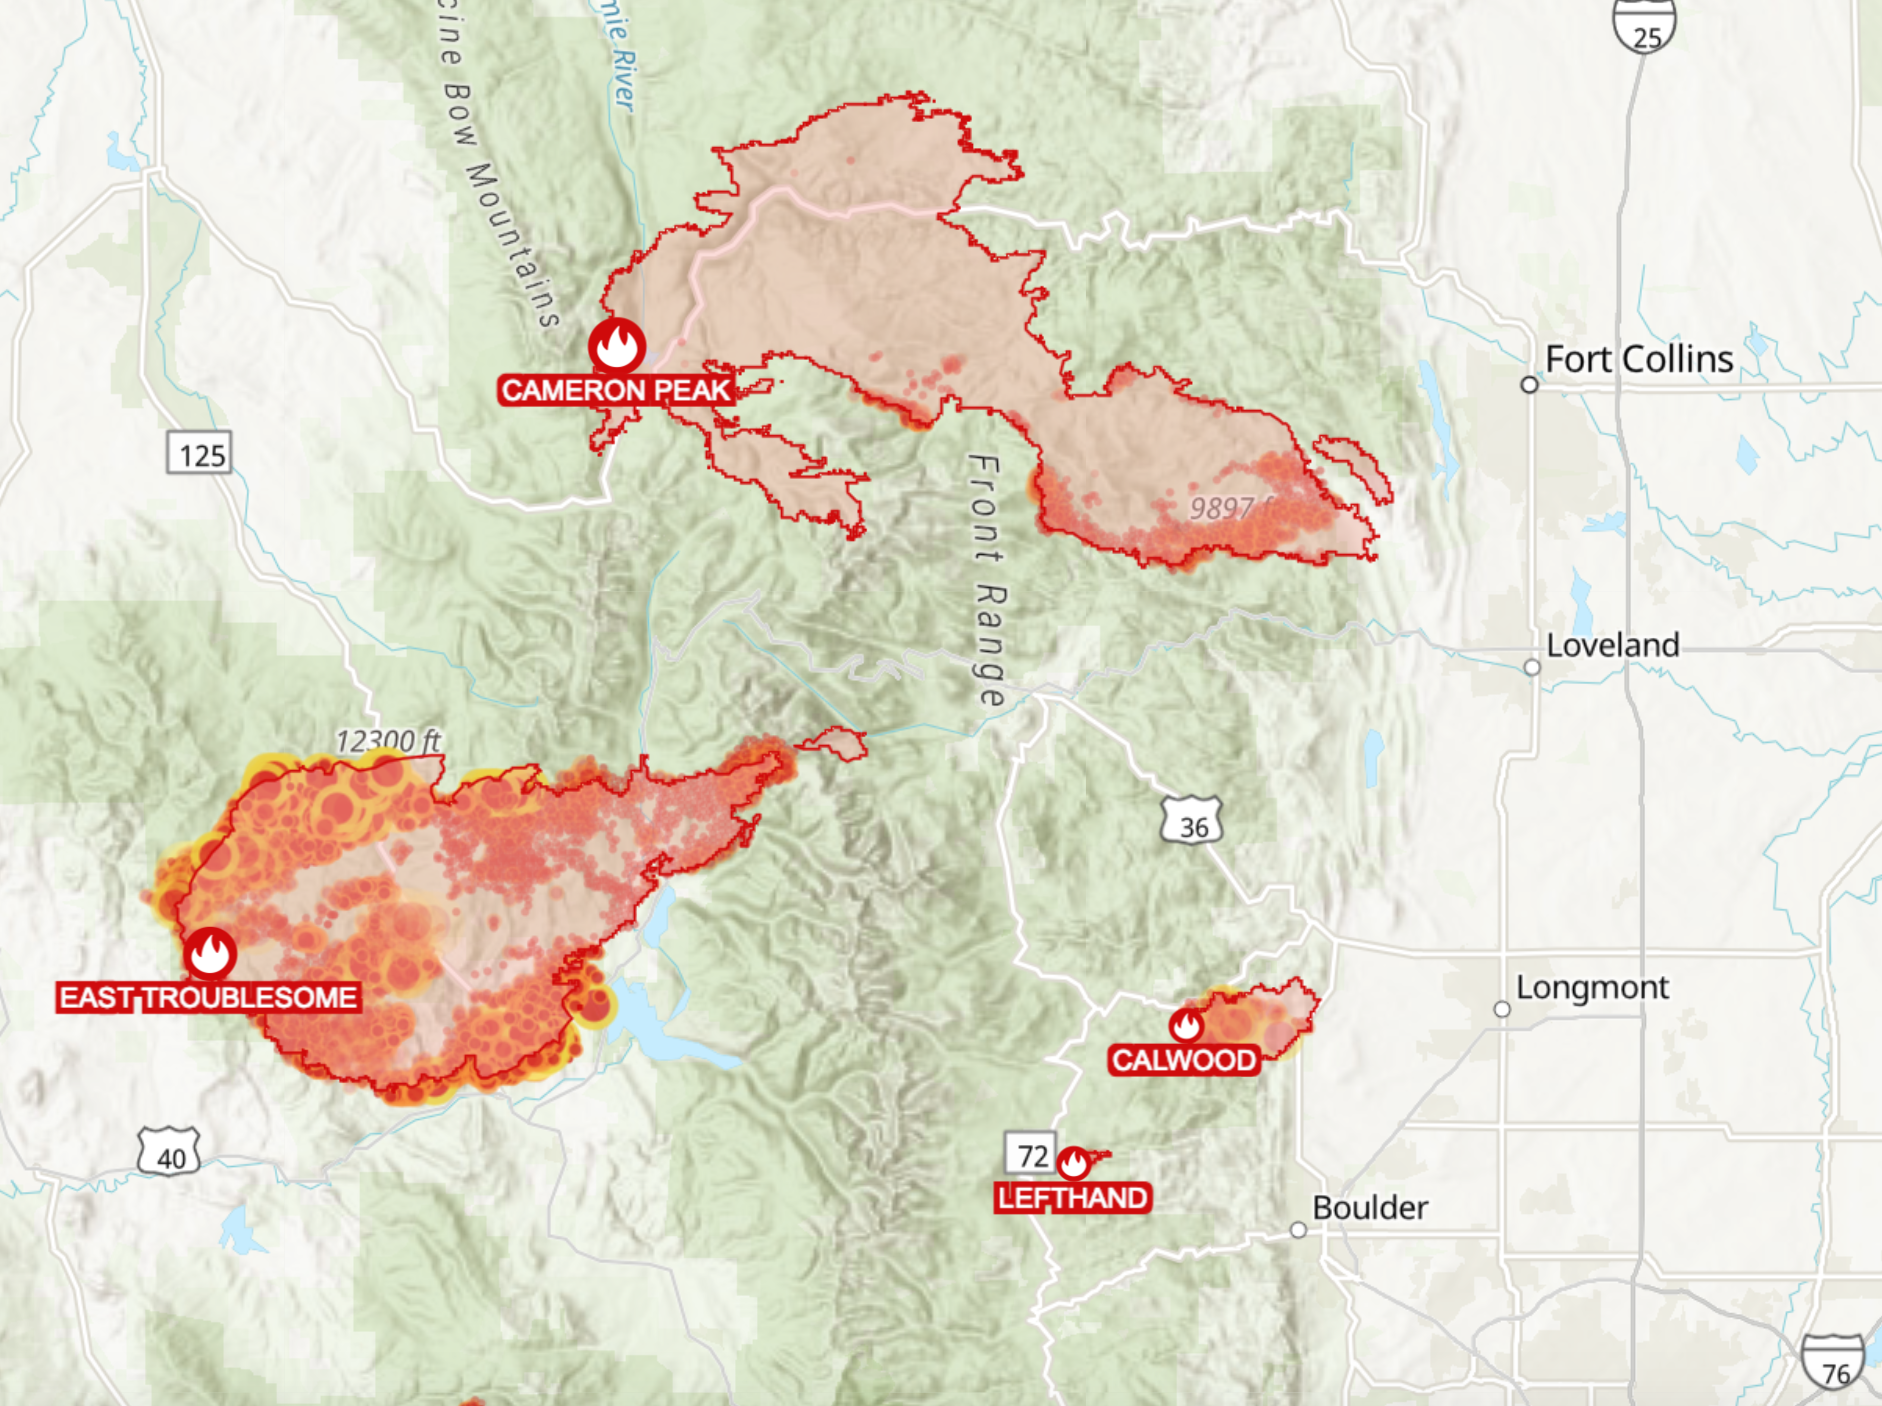 A map of the East Troublesome and Cameron Peak fires